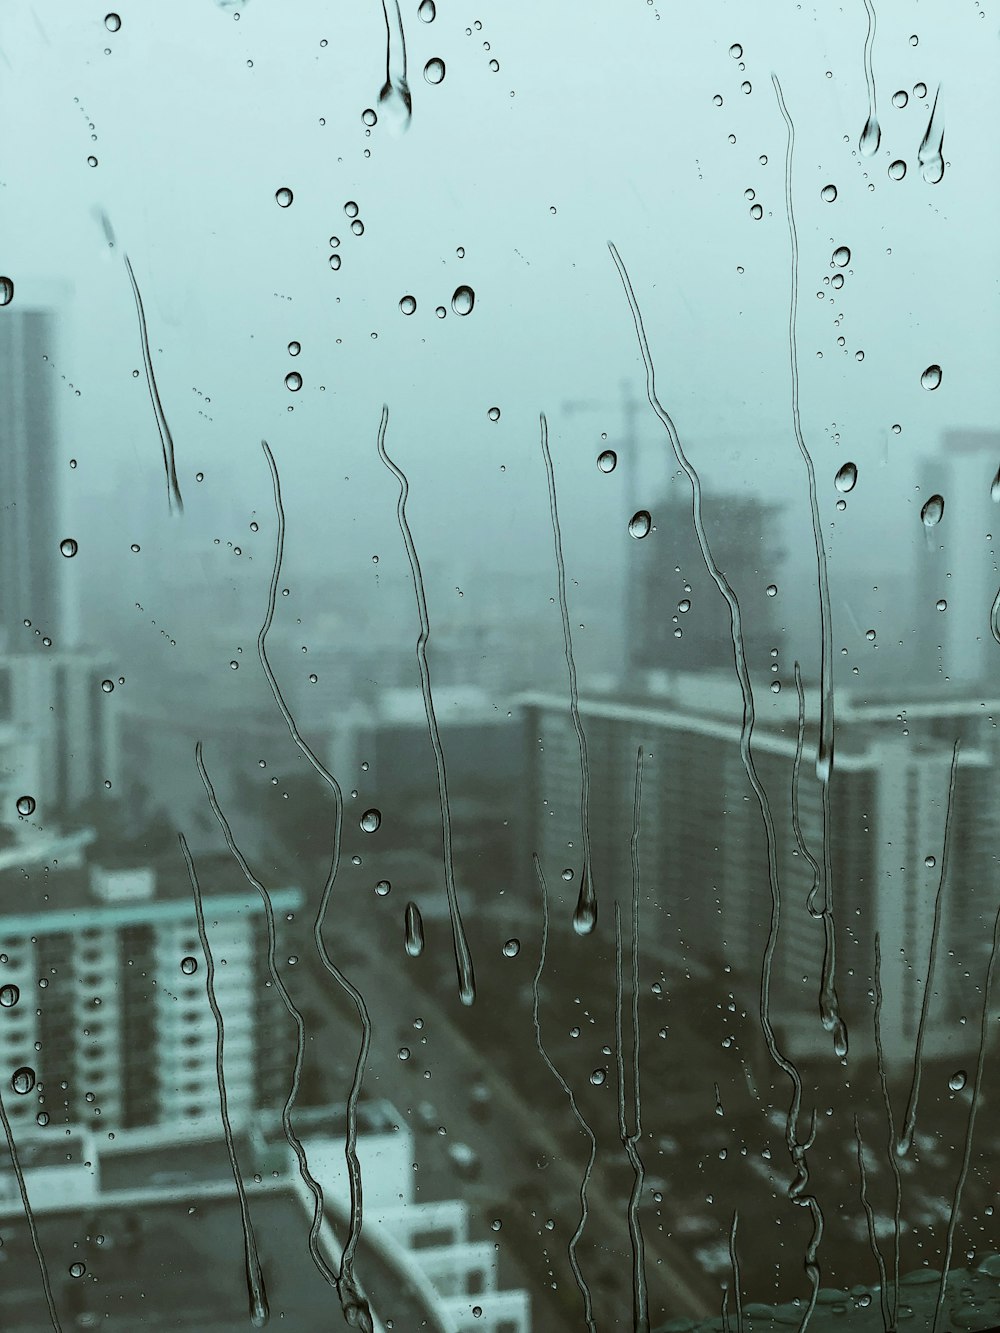 view of cityscape from glass with water droplets